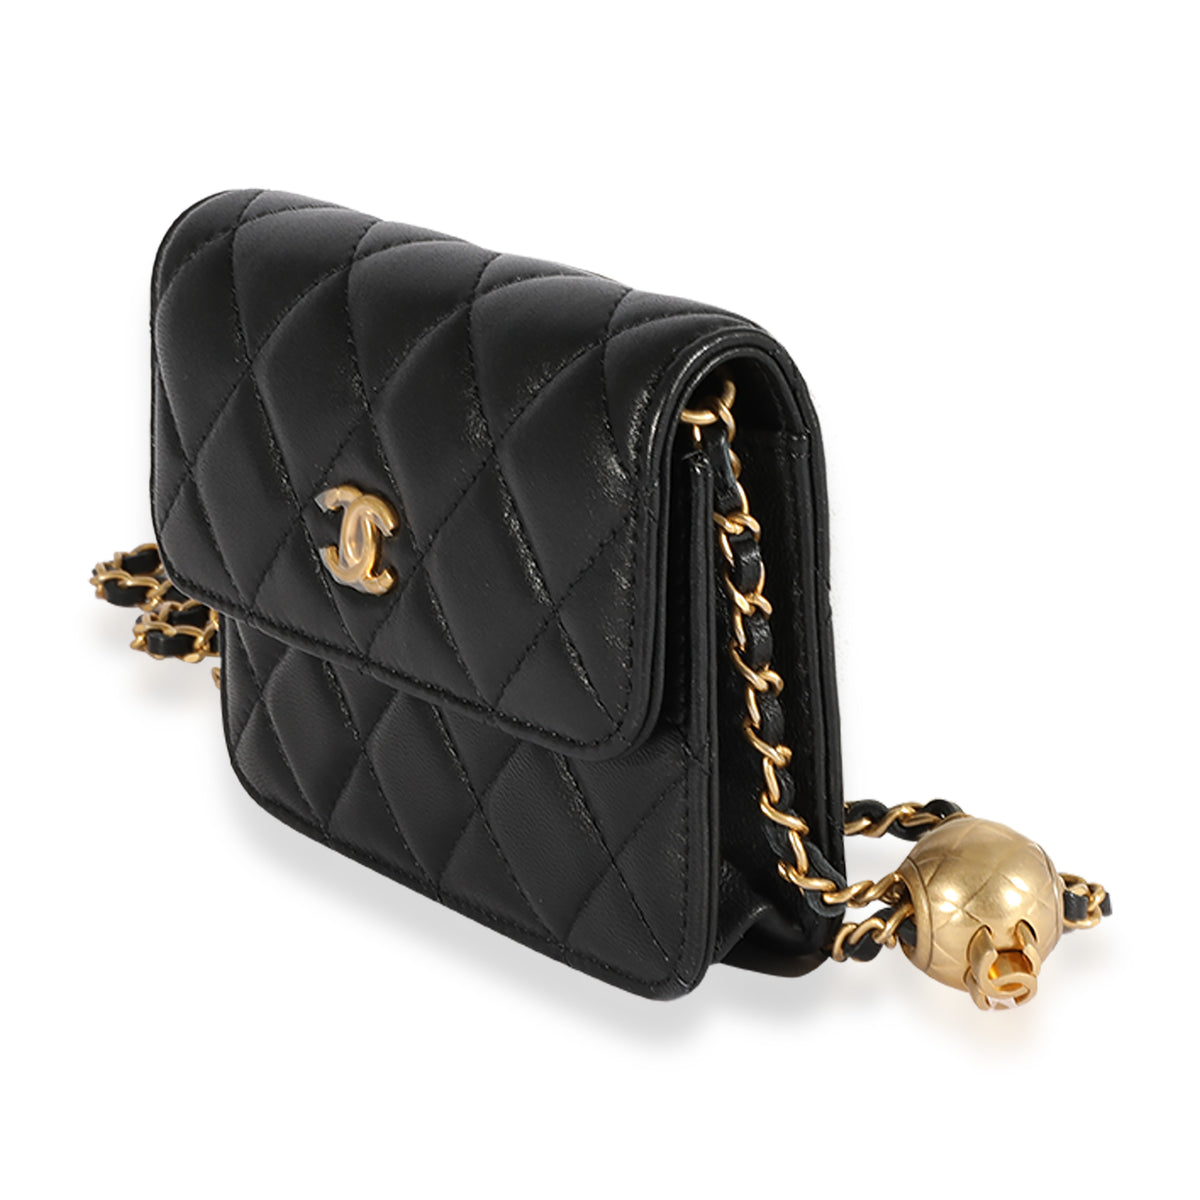 Chanel Black Quilted Lambskin Pearl Crush Clutch With Chain